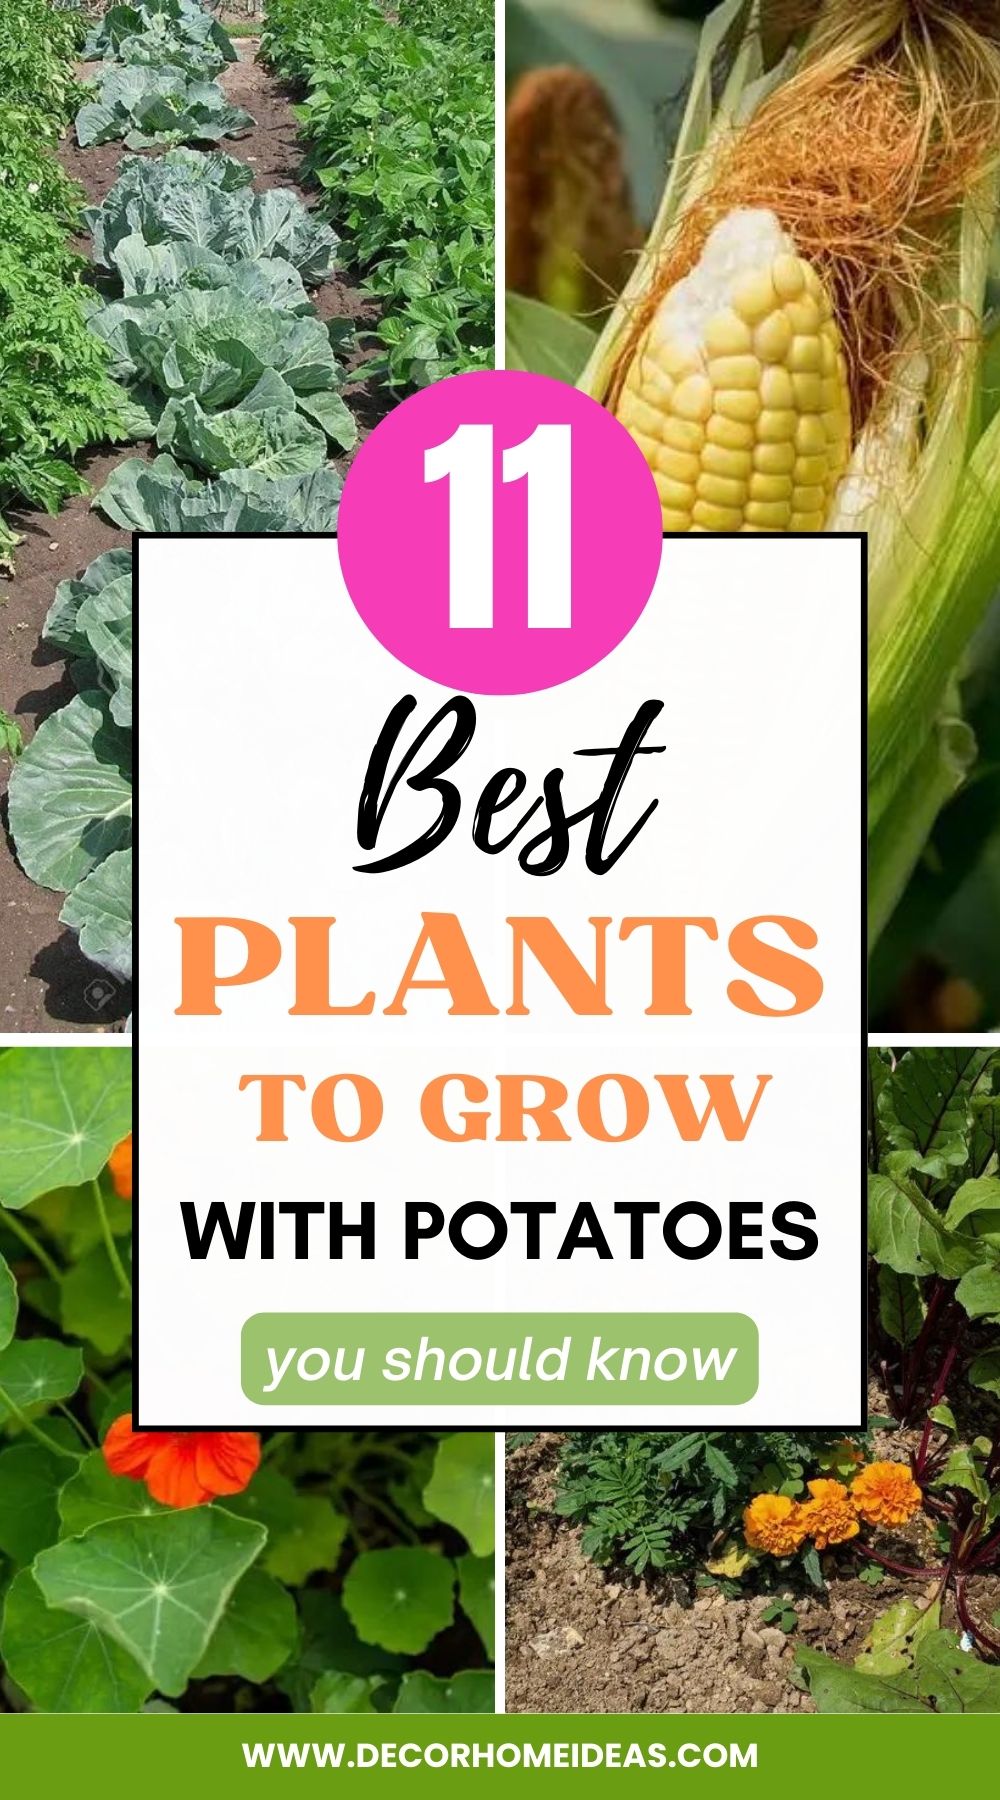 Explore the best companion plants to grow alongside potatoes for a thriving garden. From beneficial pest control to enhanced growth and flavor, discover the perfect plant pairings that will complement your potato crop and maximize your harvest.